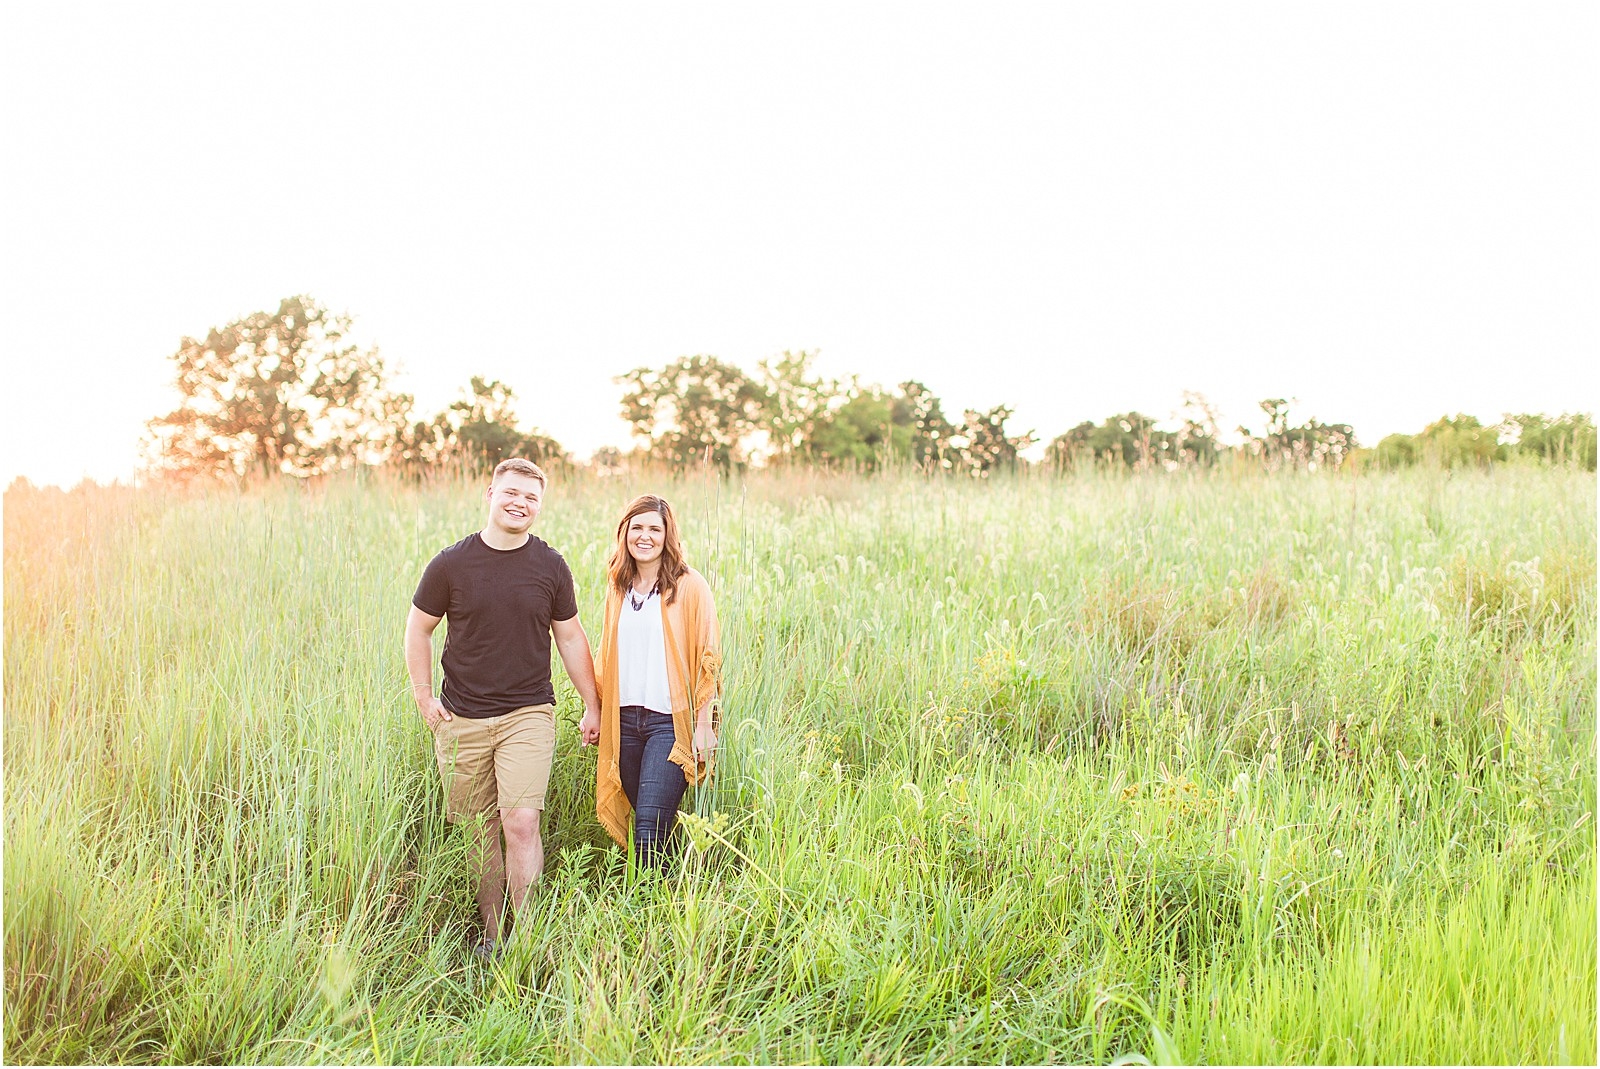 Downtown Huntingburgh Engagement Session | Gabby and Aidan | Bret and Brtandie Photography 023.jpg